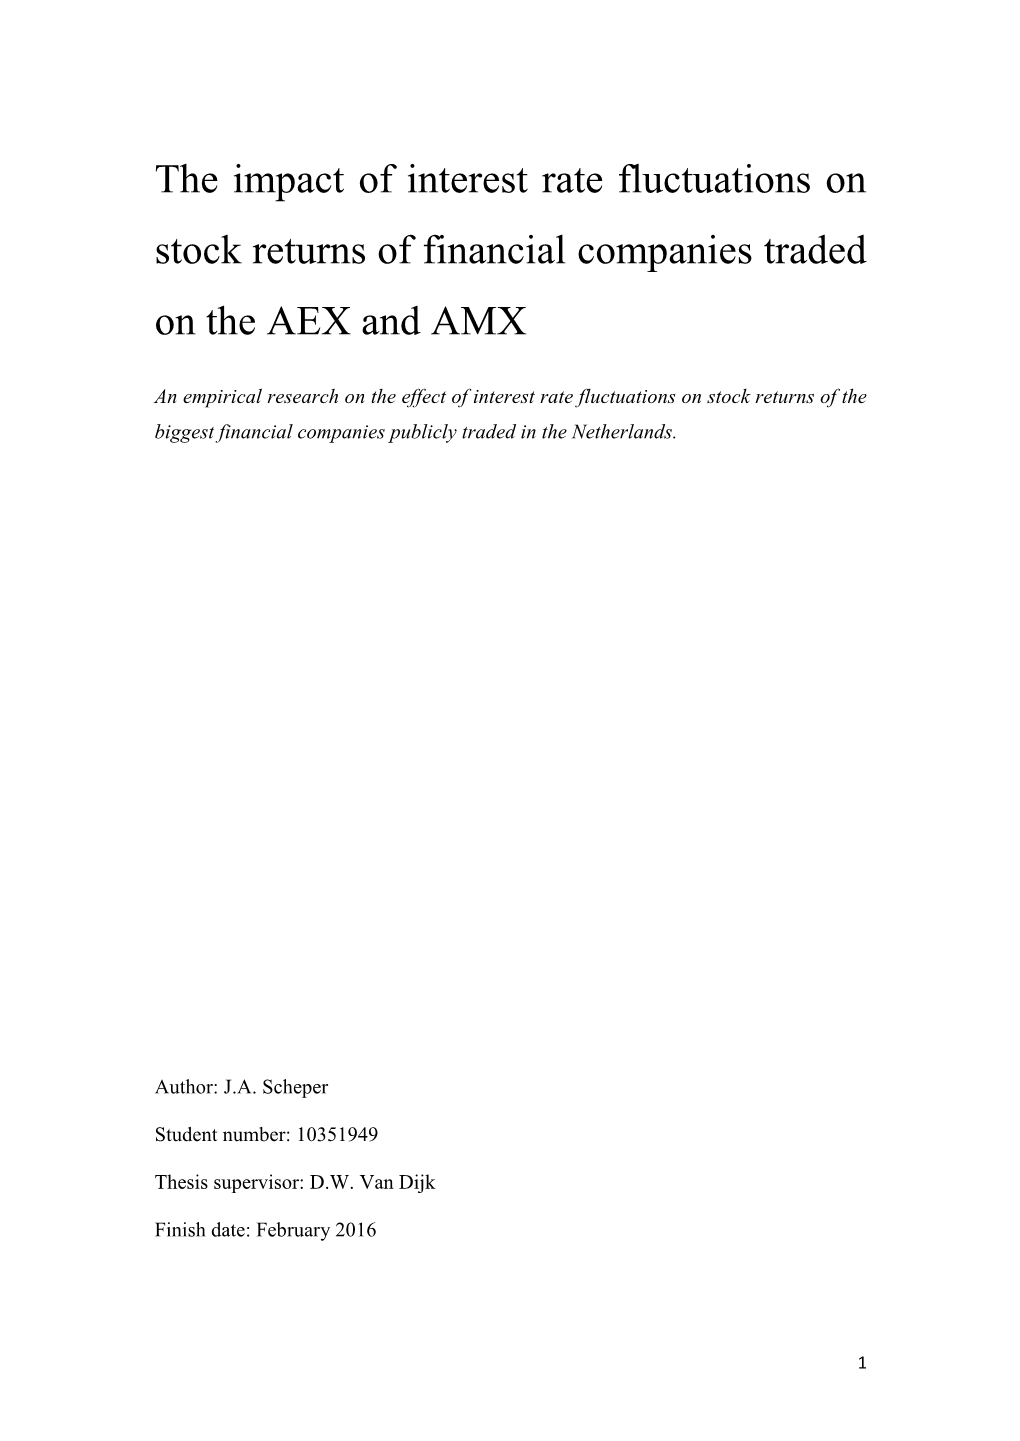 The Impact of Interest Rate Fluctuations on Stock Returns of Financial Companies Traded on the AEX and AMX